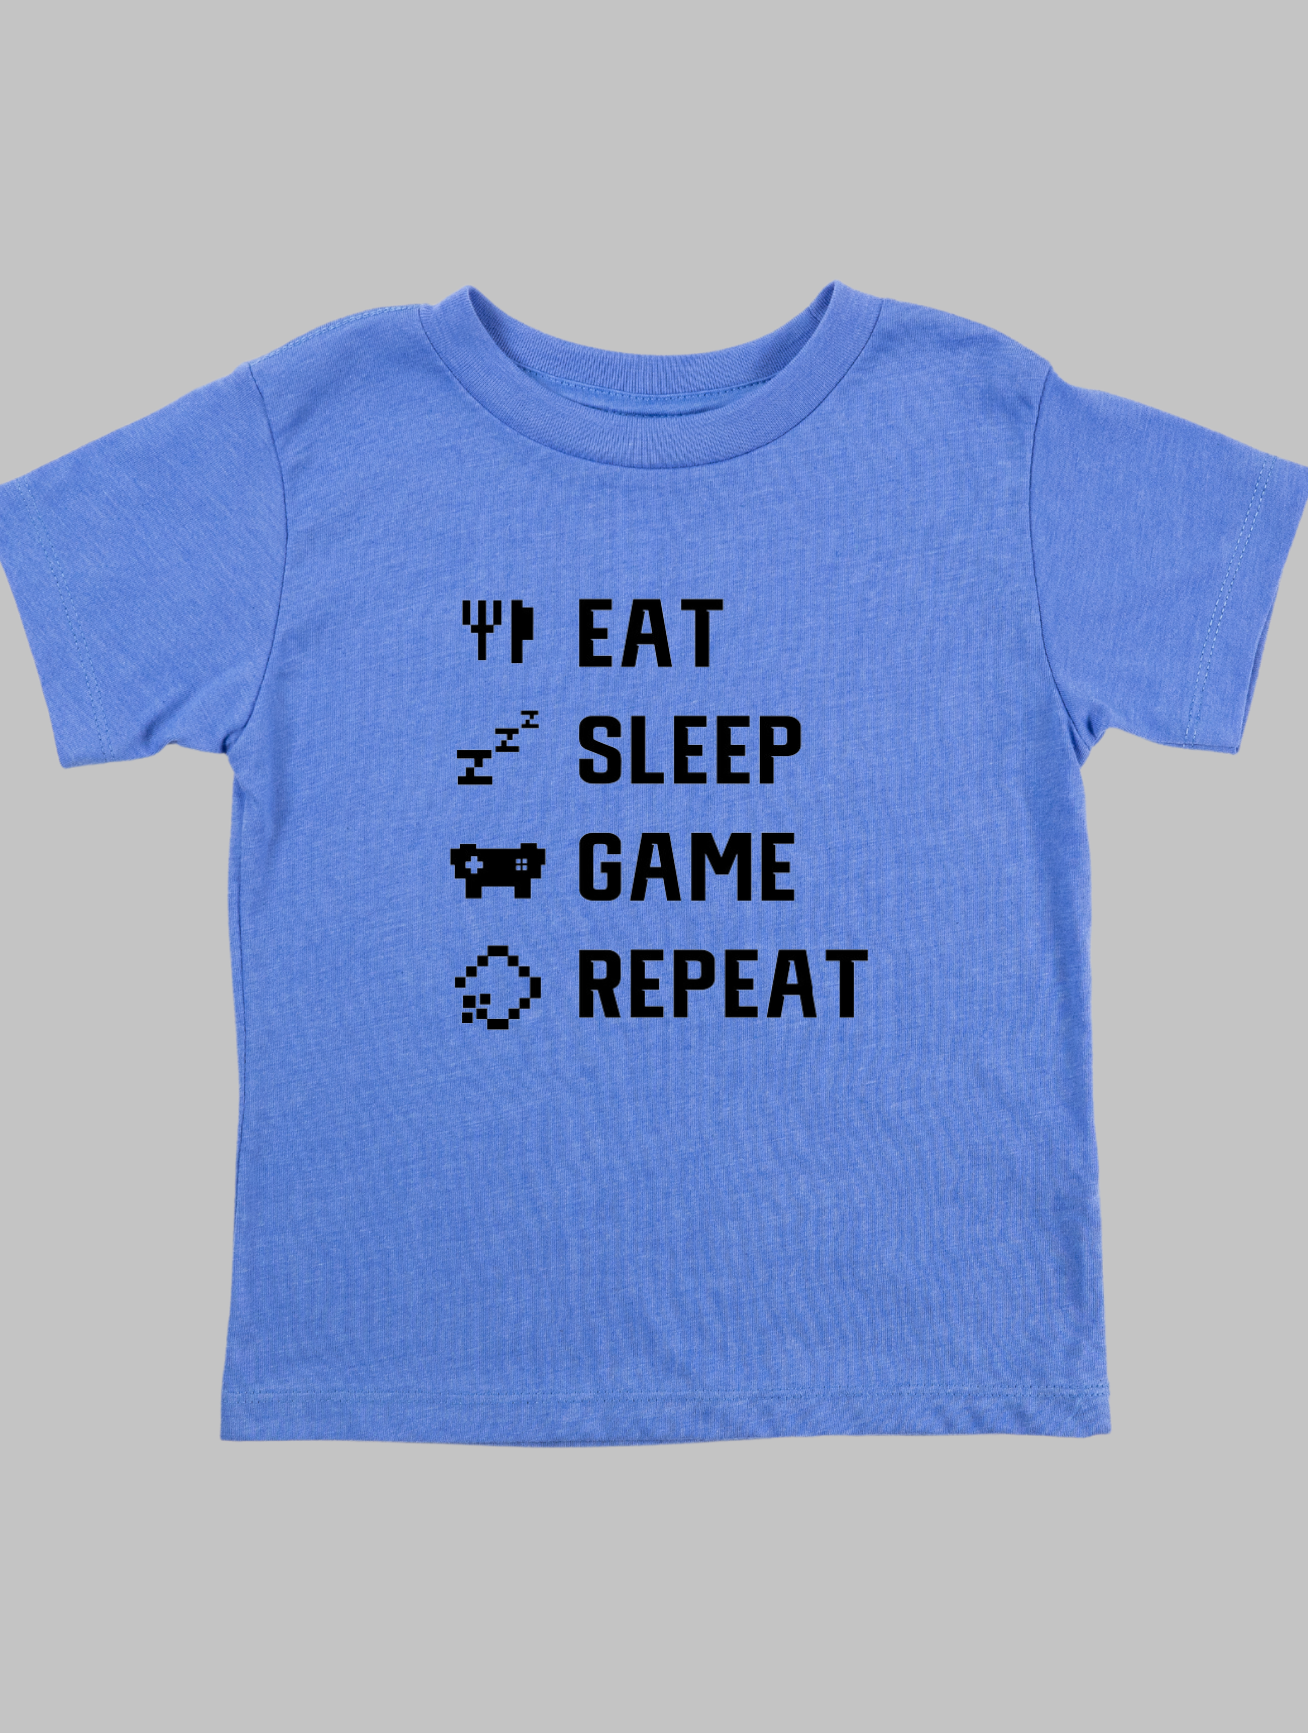 Eat, Sleep, Game, Repeat - Youth T-shirt